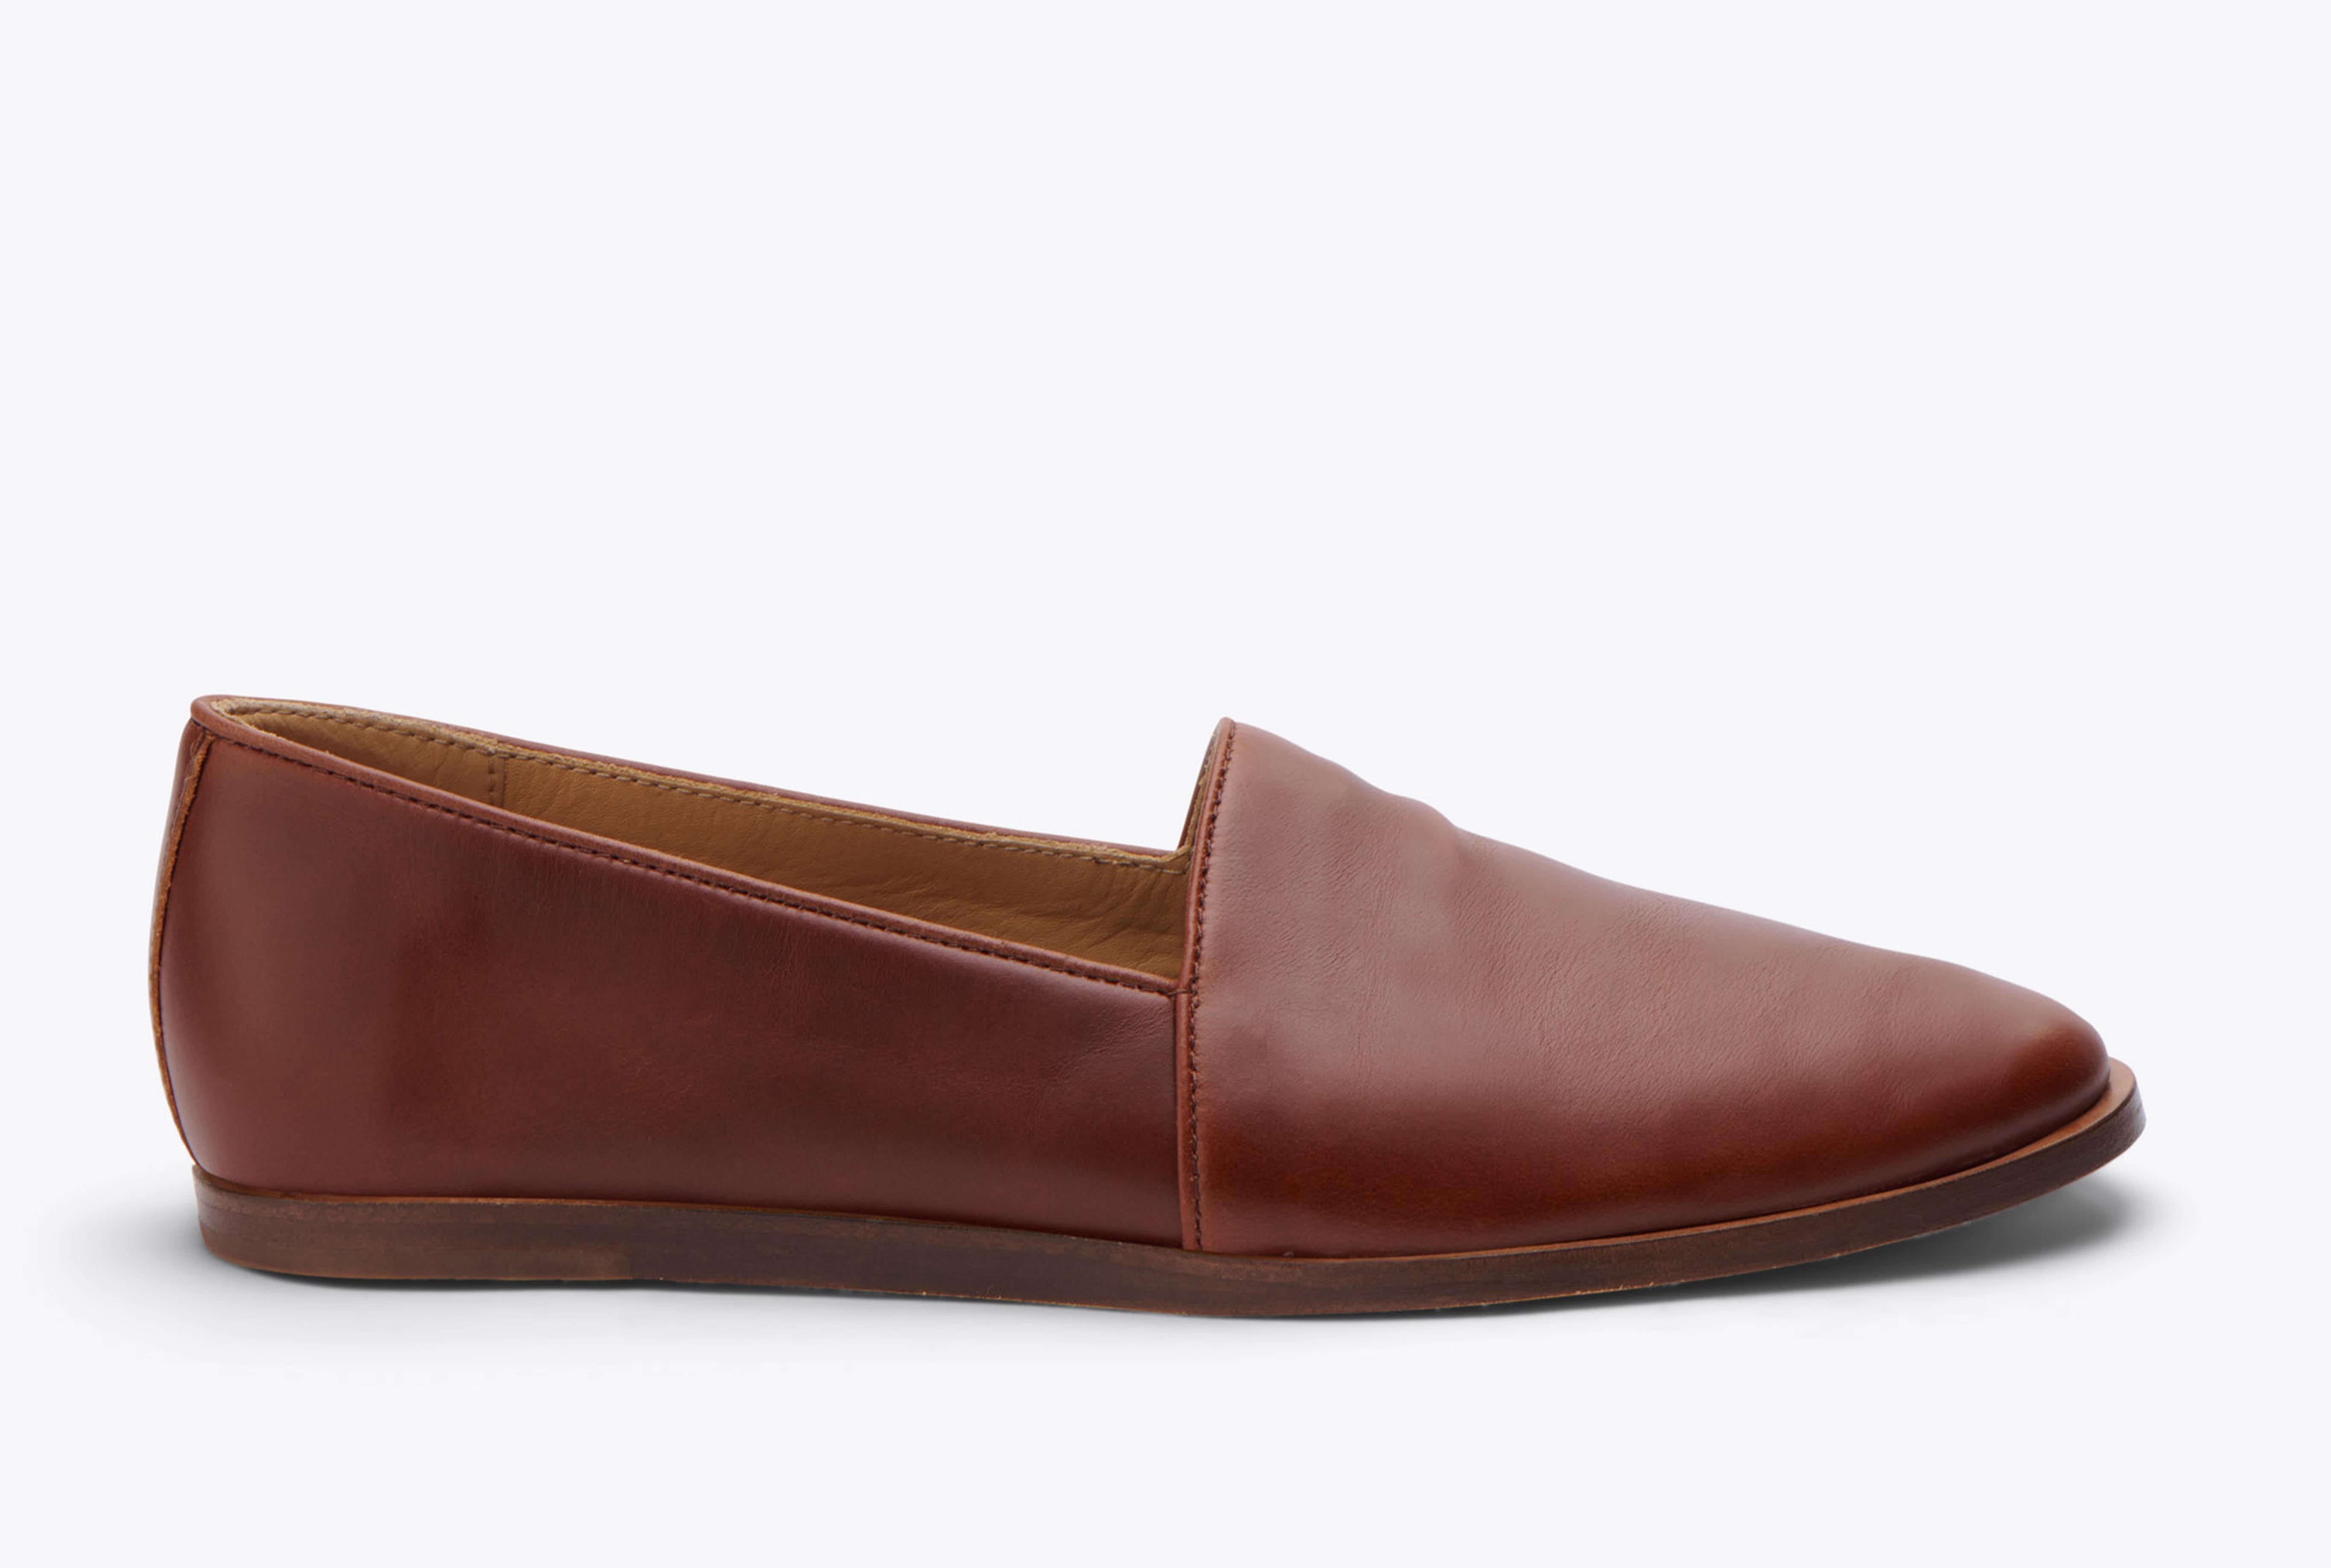 Nisolo Alejandro Slip on Brandy - Every Nisolo product is built on the foundation of comfort, function, and design. 